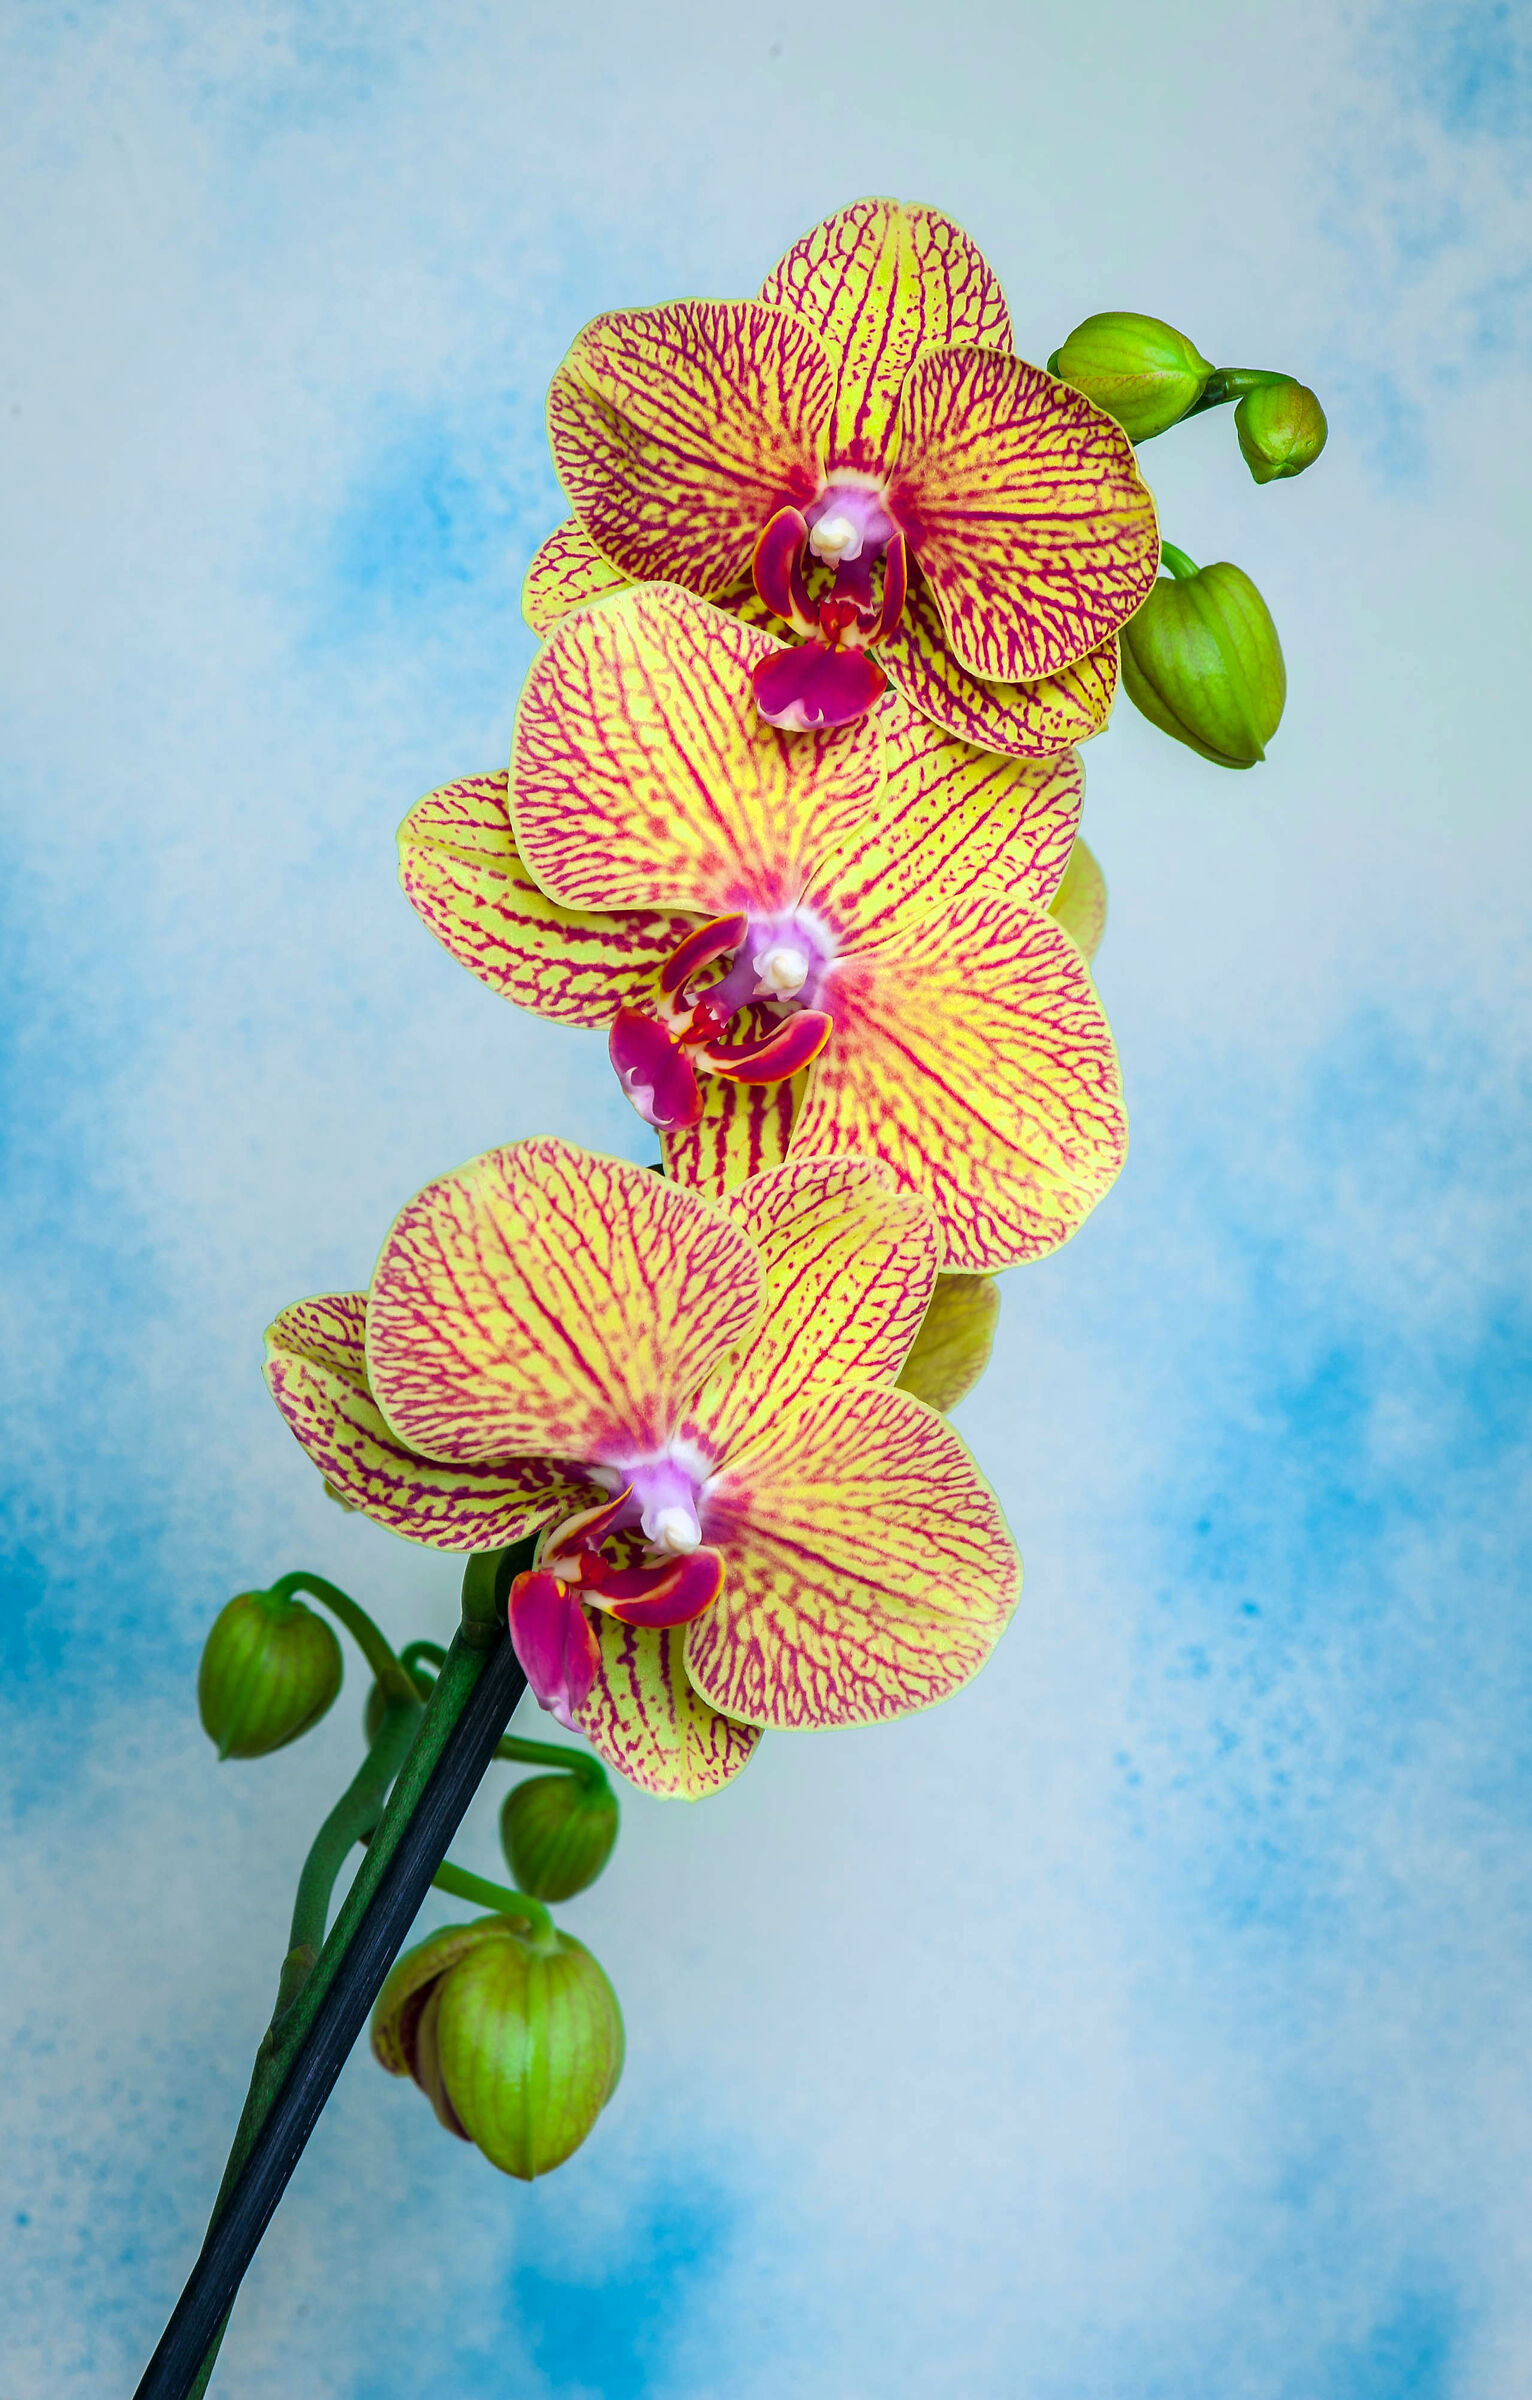 A wonder of Orchid...